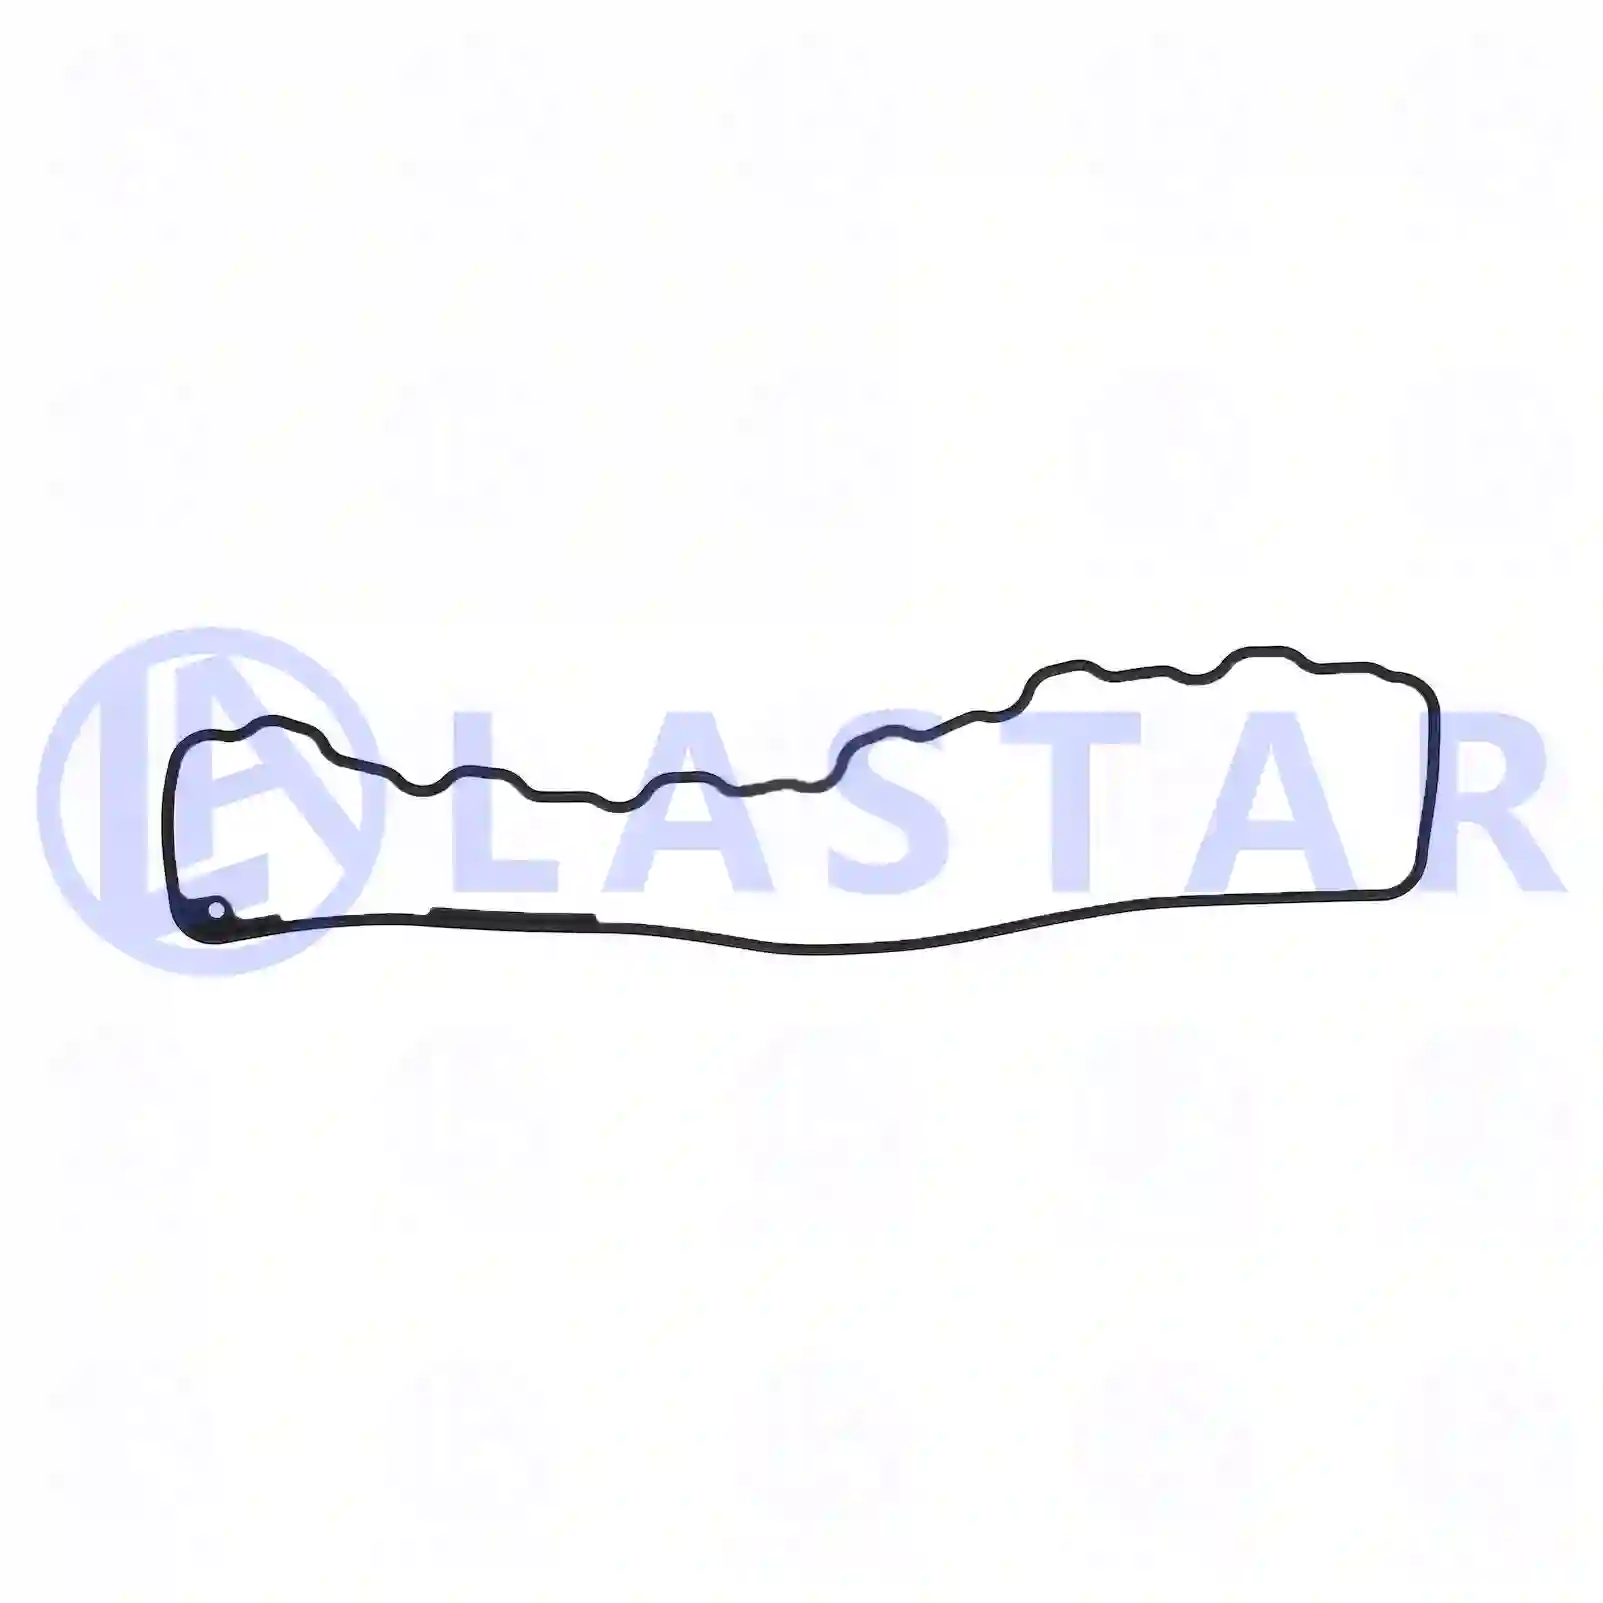 Gasket, cylinder head cover, 77701441, 9060160521, 9060160621, 9060161121 ||  77701441 Lastar Spare Part | Truck Spare Parts, Auotomotive Spare Parts Gasket, cylinder head cover, 77701441, 9060160521, 9060160621, 9060161121 ||  77701441 Lastar Spare Part | Truck Spare Parts, Auotomotive Spare Parts